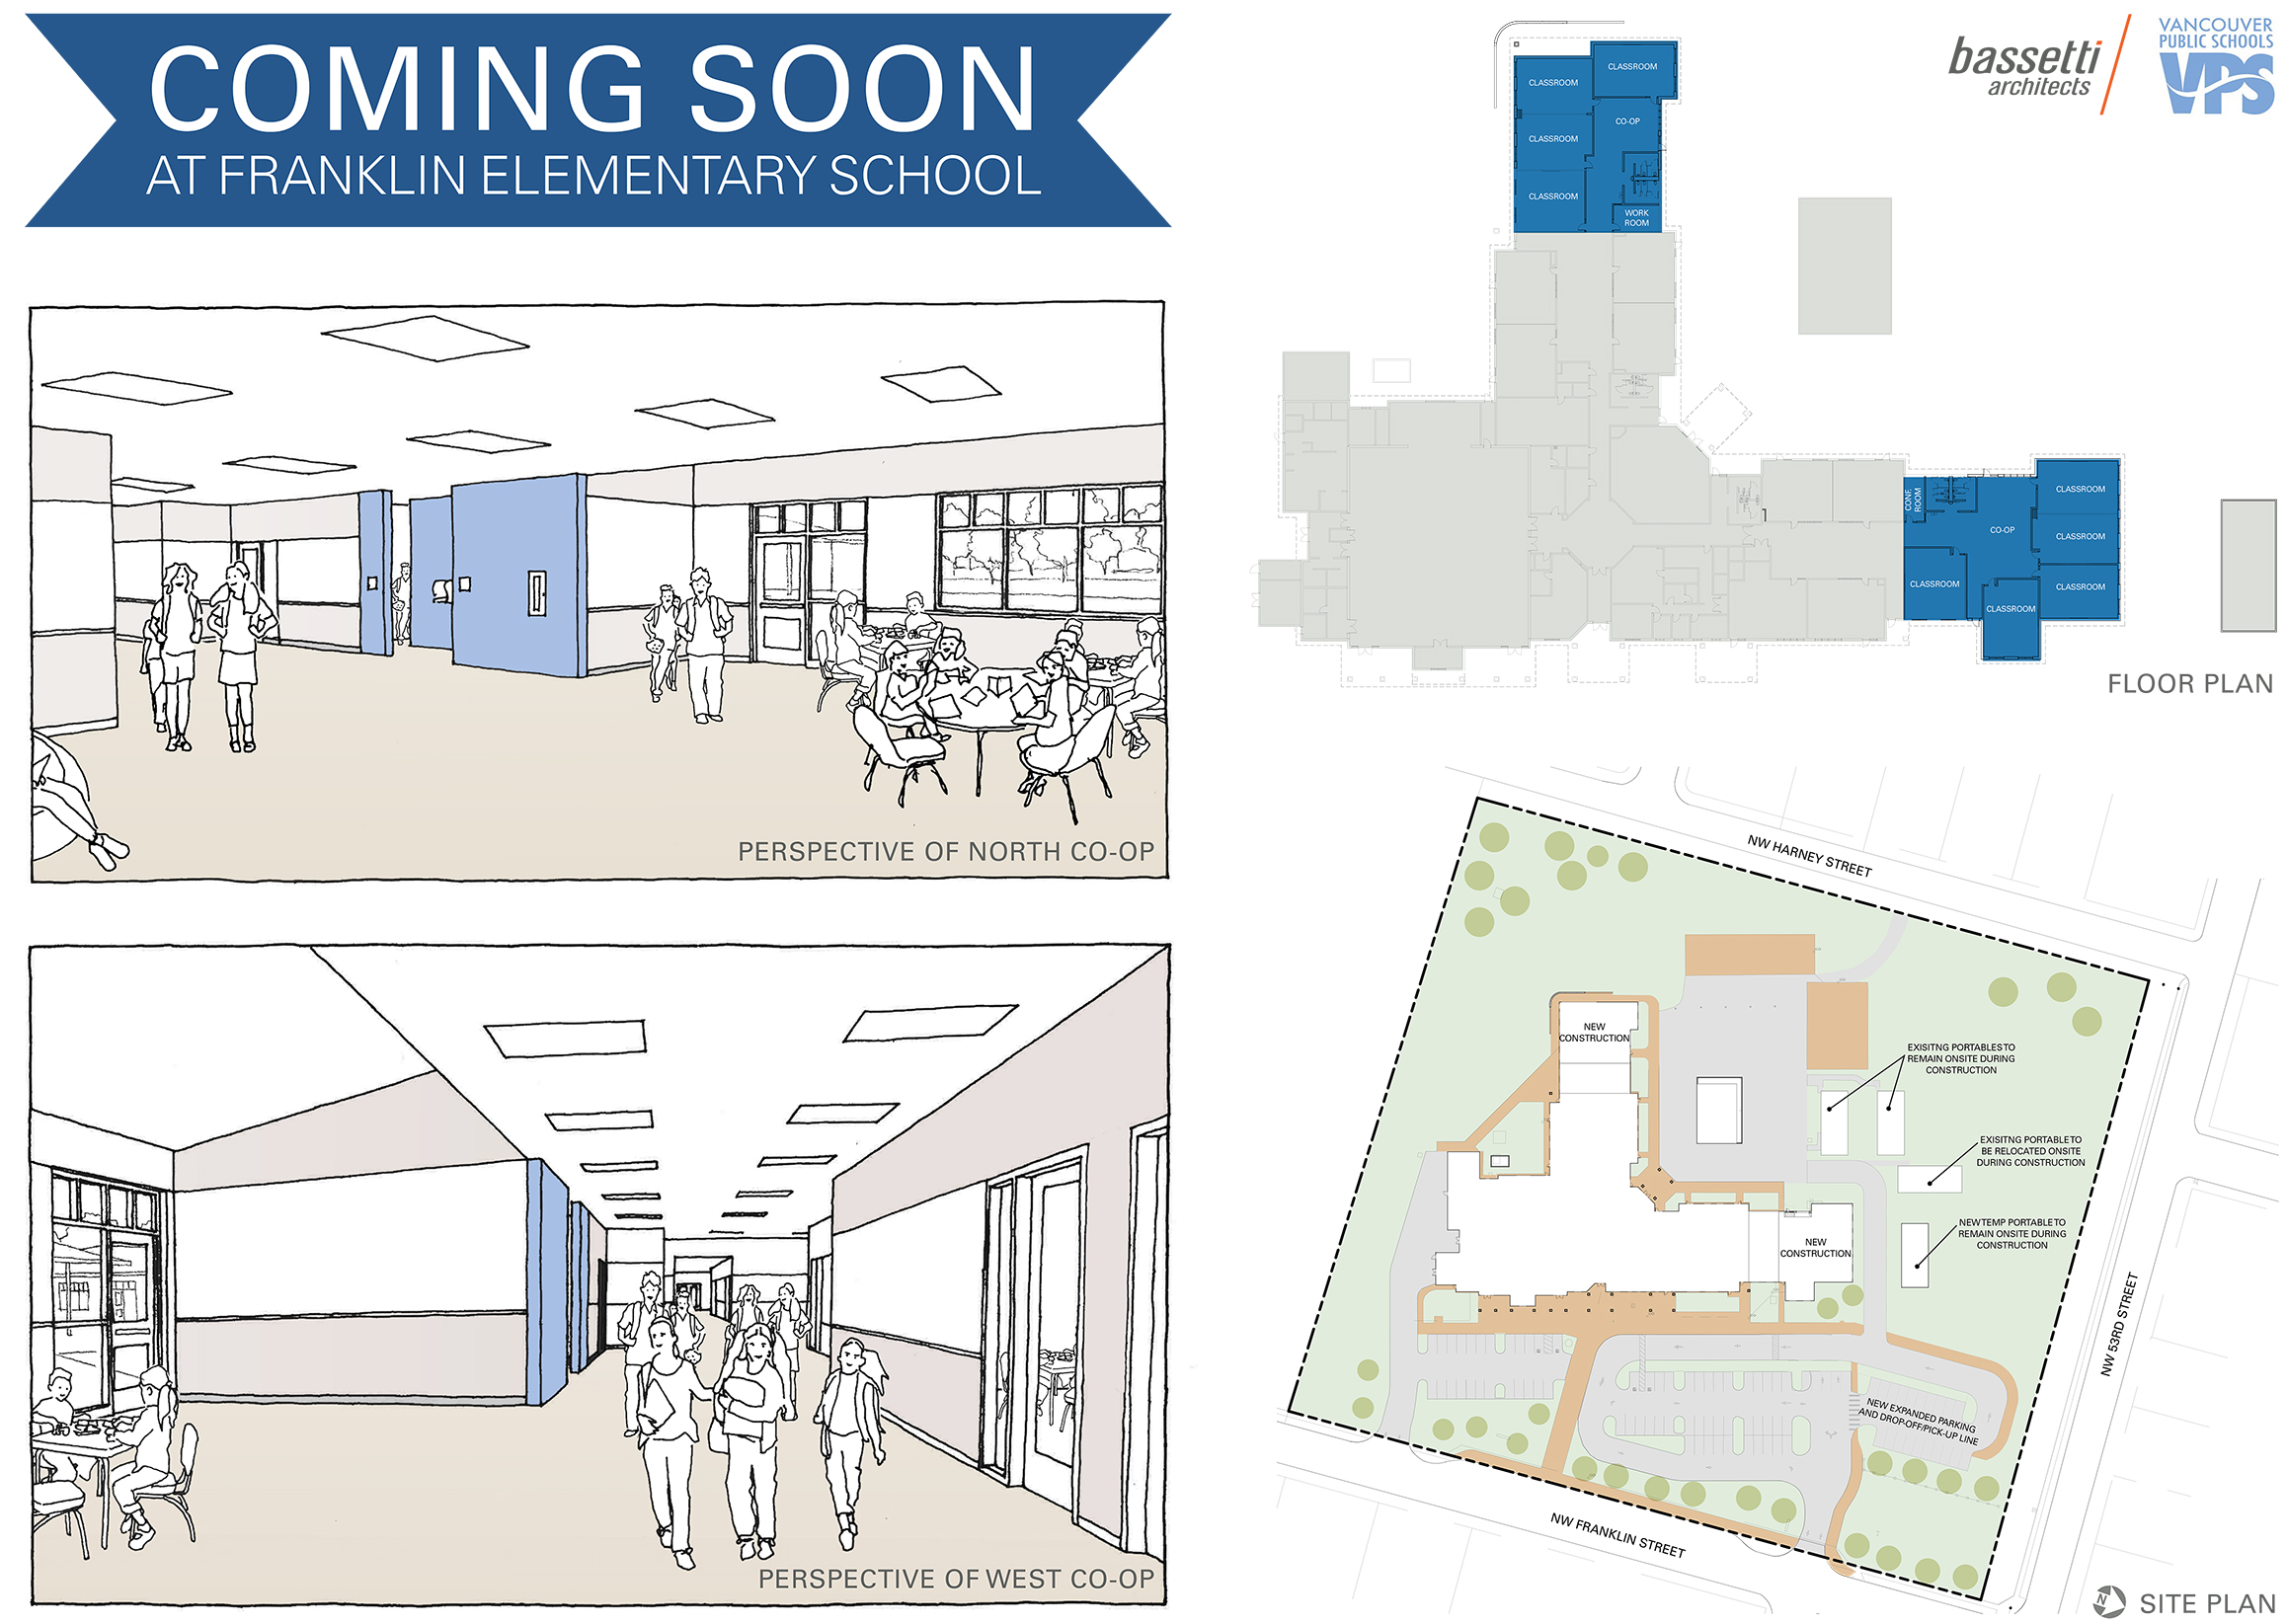 Coming soon at Franklin Elementary School: Perspective of north co-op and west co-op